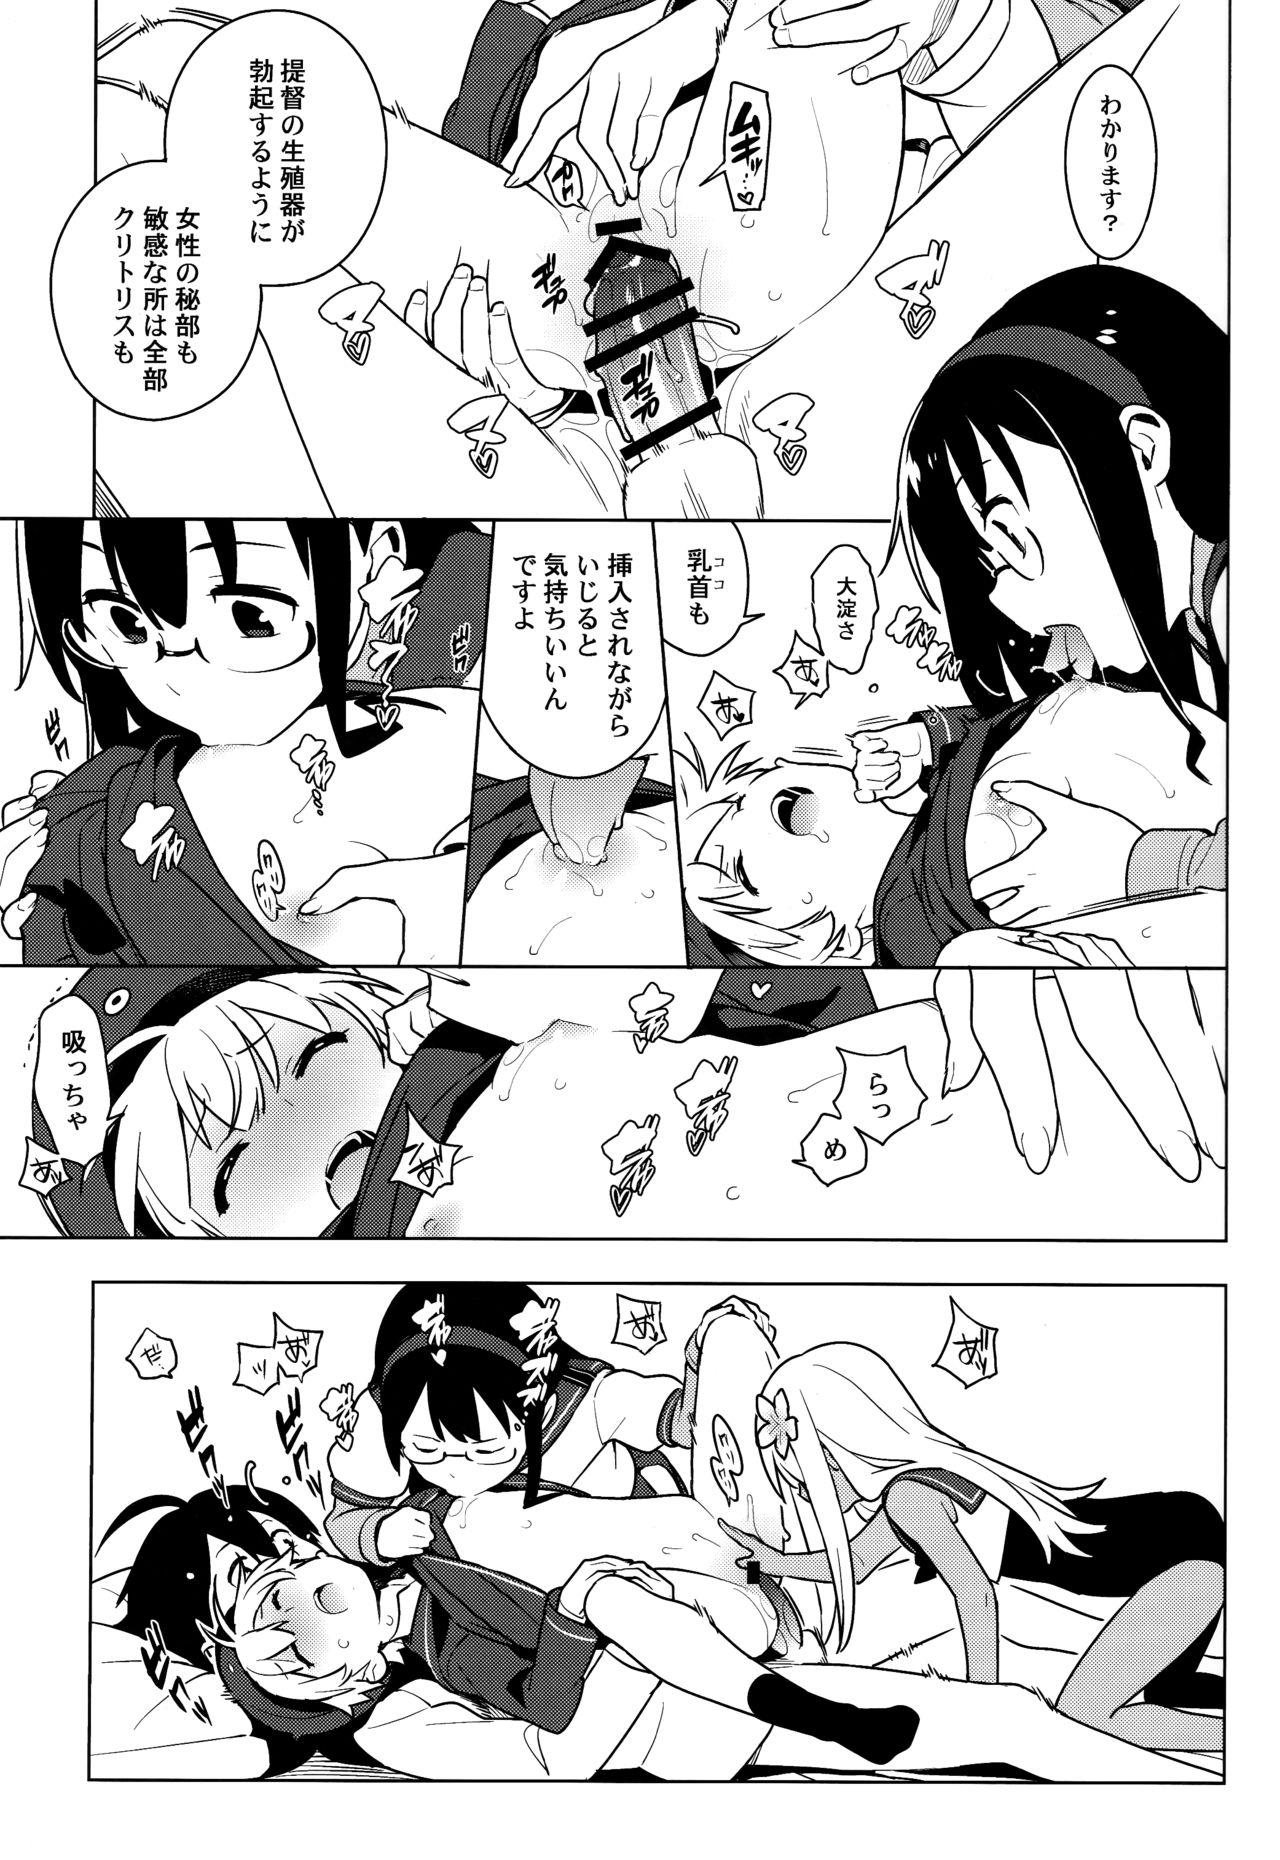 Village ALTER:PASSIVE SKILL2 - Kantai collection Pussy Licking - Page 10